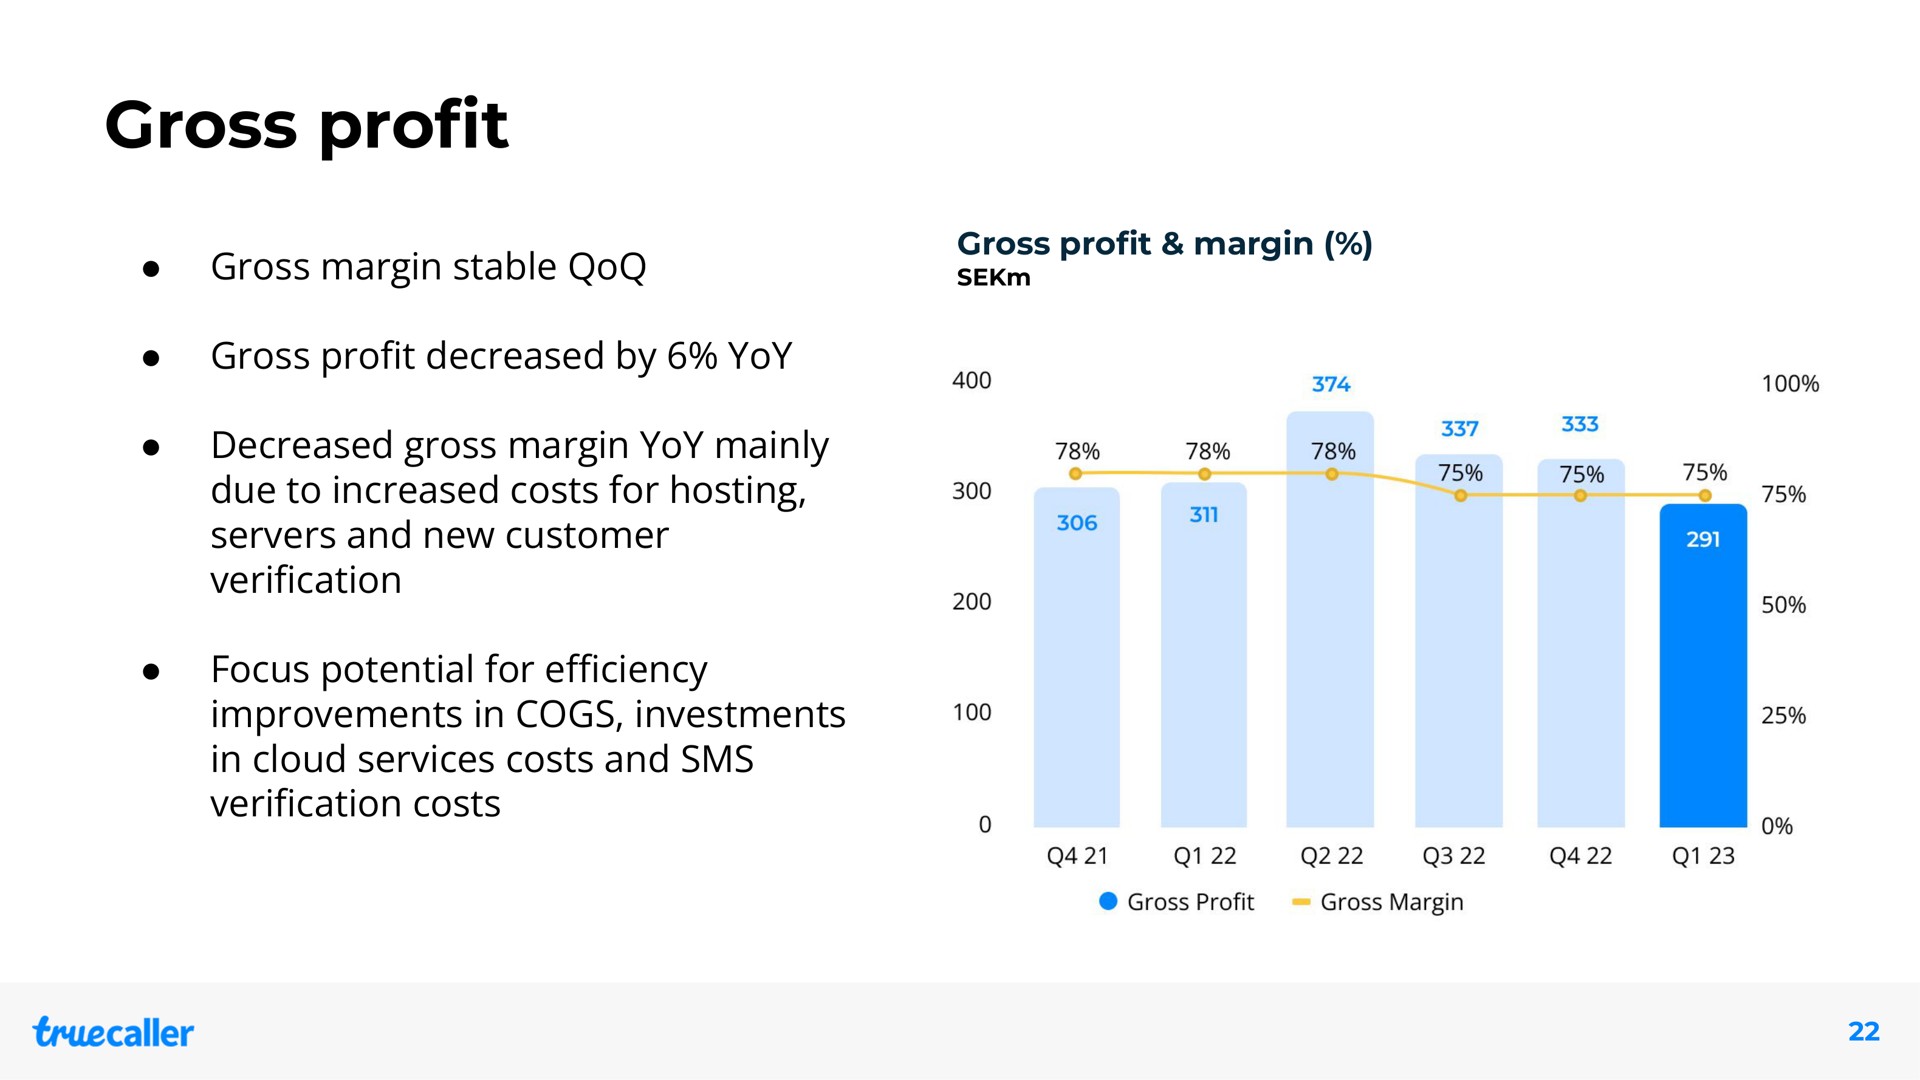 gross pro gross margin stable gross pro decreased by yoy decreased gross margin yoy mainly due to increased costs for hosting servers and new customer veri cation focus potential for improvements in cogs investments in cloud services costs and veri cation costs profit profit verification efficiency verification | Truecaller